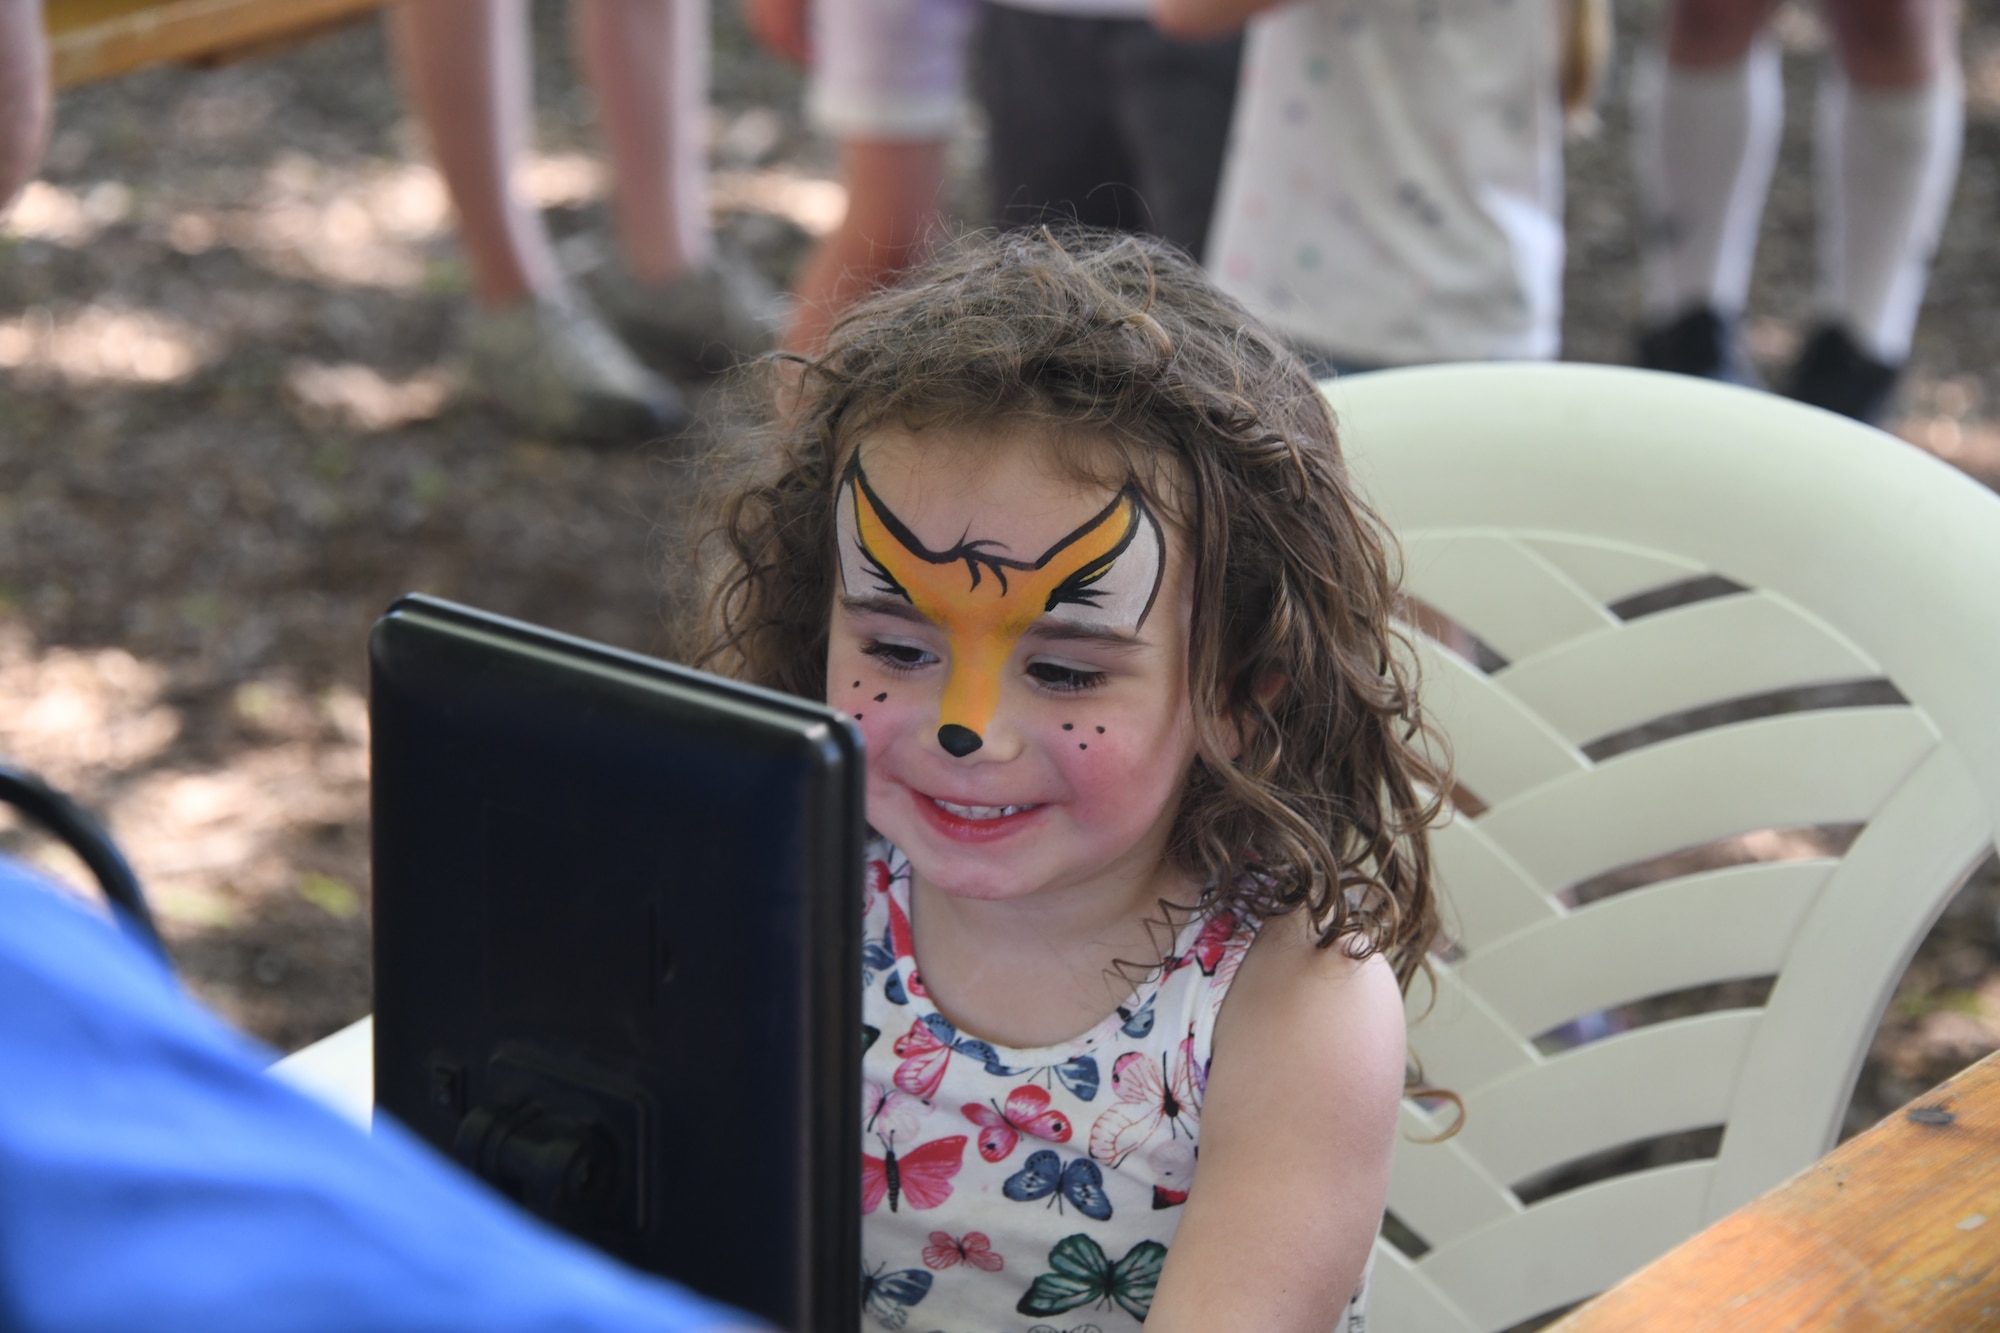 Amelia Strange, daughter of Tech. Sgt. Selina Strange smiles as she sees her face painted as a fox for the first time at the 2021 557th Weather Wing Picnic at the Bellevue Berry Farm in Bellevue, Nebraska on June 4, 2021.